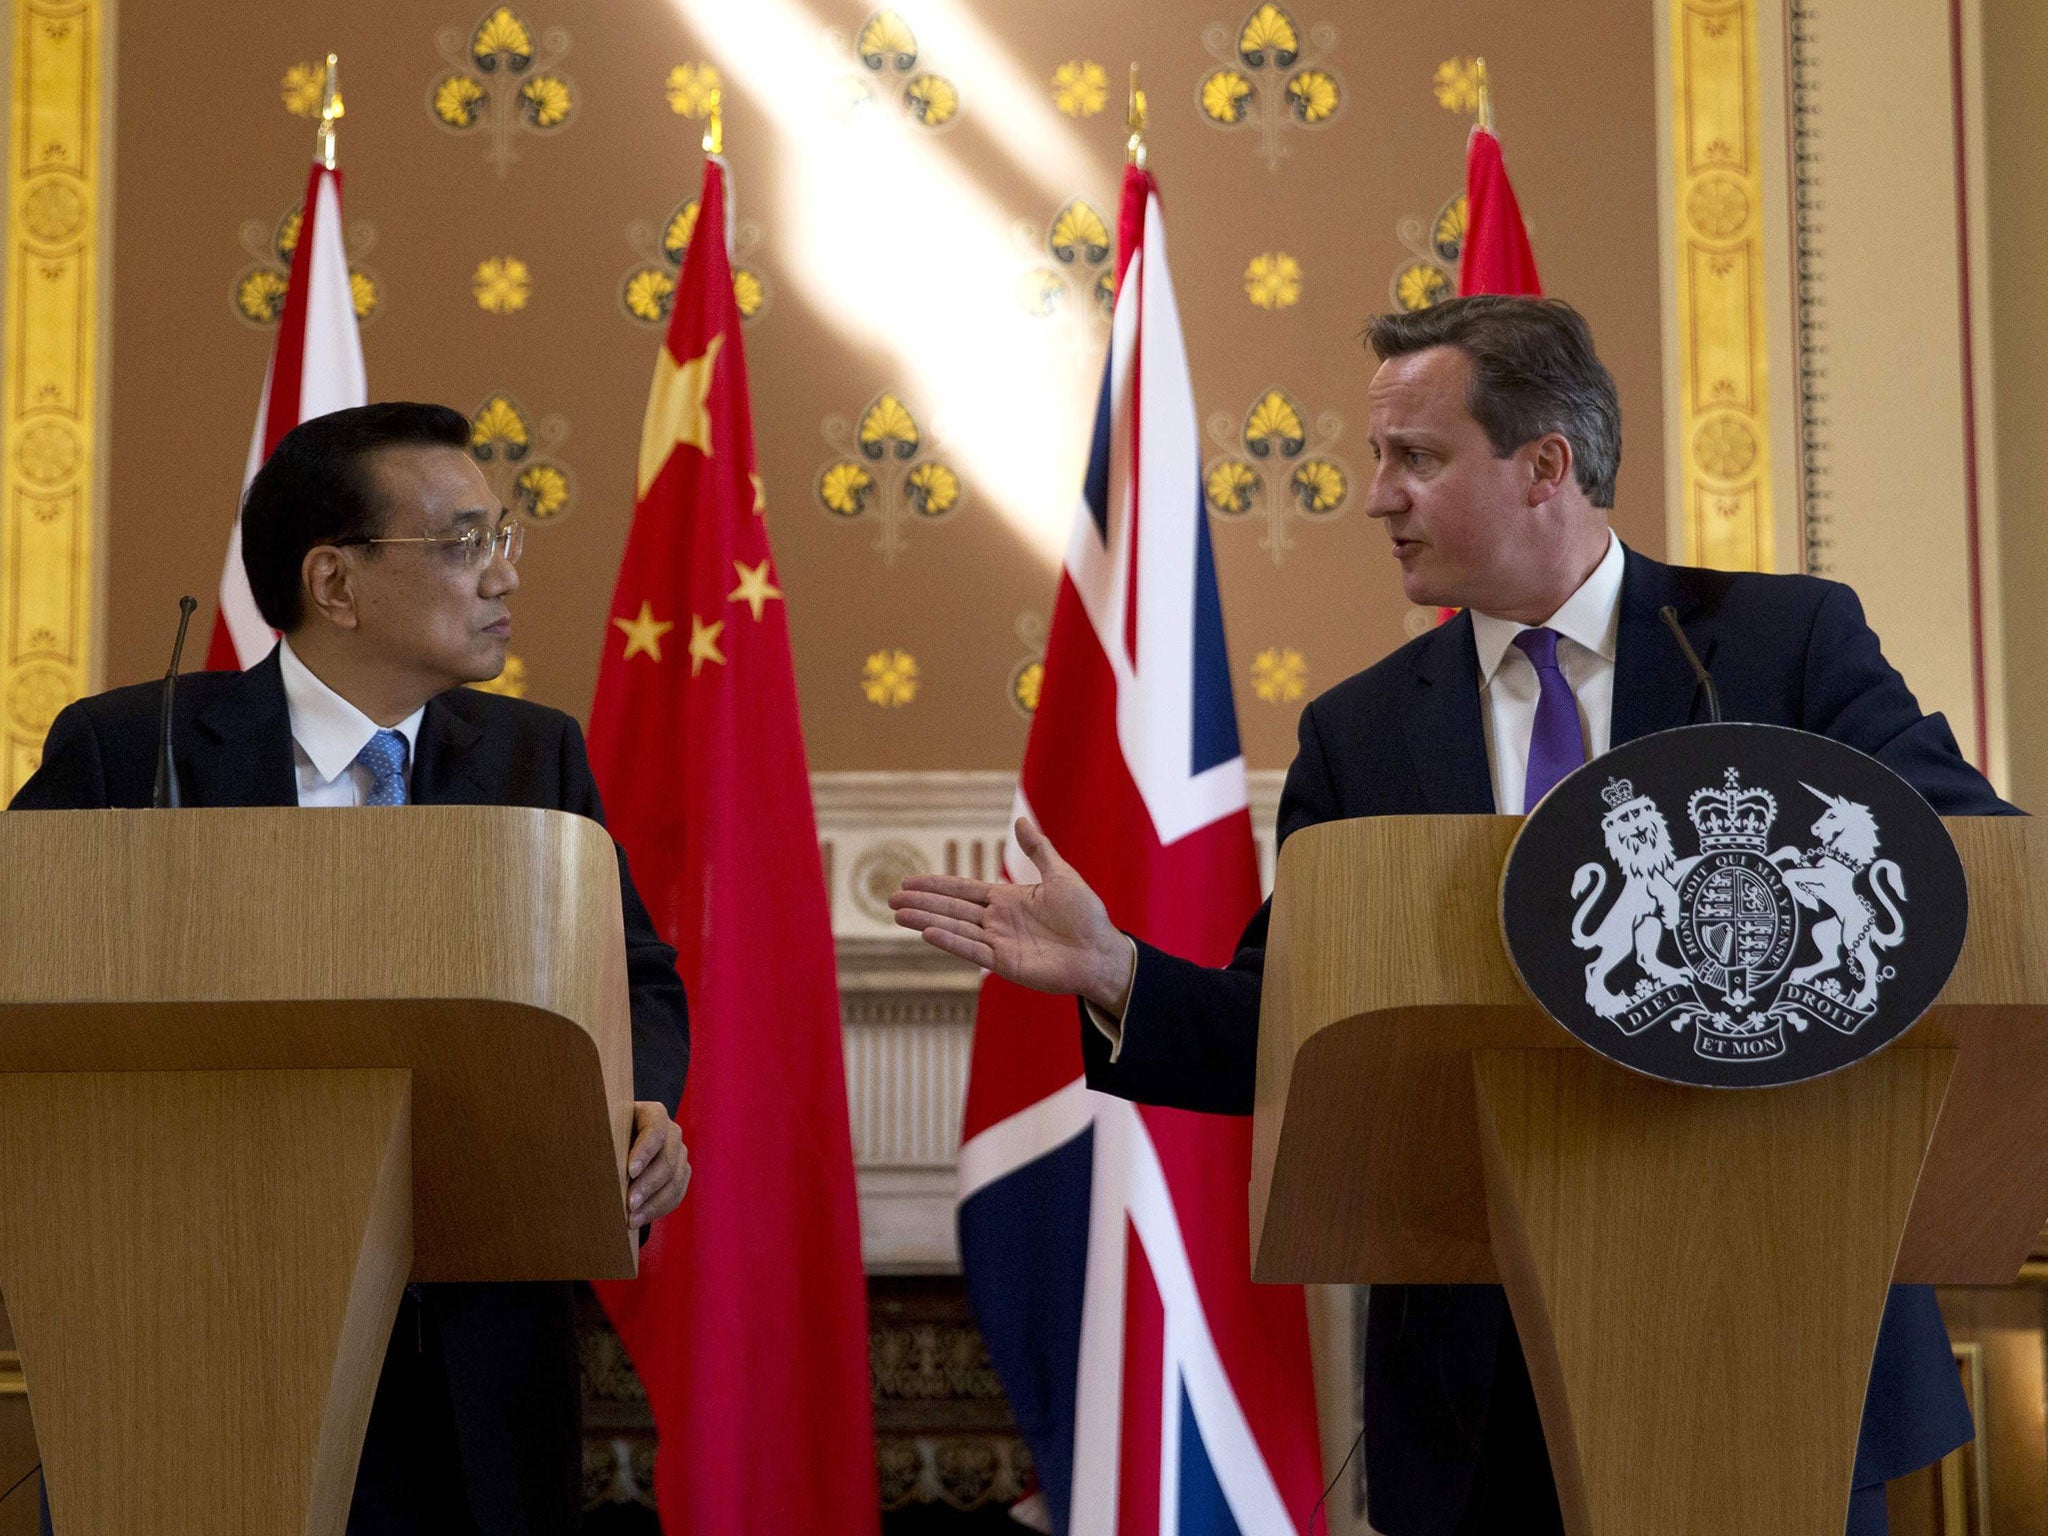 Chinese Premier Li Keqiang (L) looks on as Britain's Prime Minister David Cameron (R) speaks during a joint press conference in London on June 17, 2014.